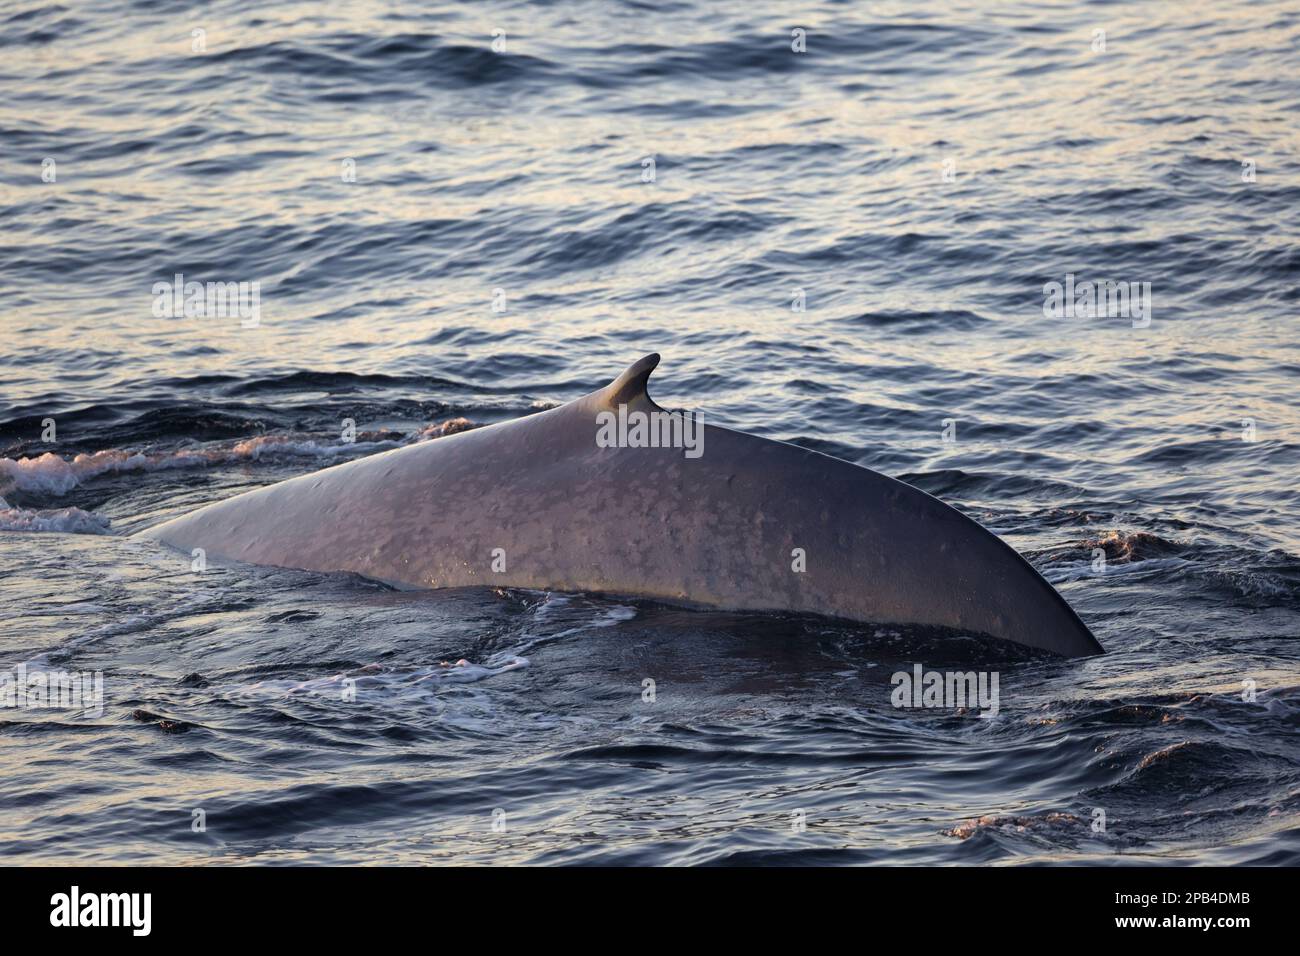 Blue whale, blue whales (Balaenoptera musculus), Baleen whales, Marine mammals, Mammals, Animals, Whales, Blue whale adult, surfacing, Isfjorden, Spit Stock Photo